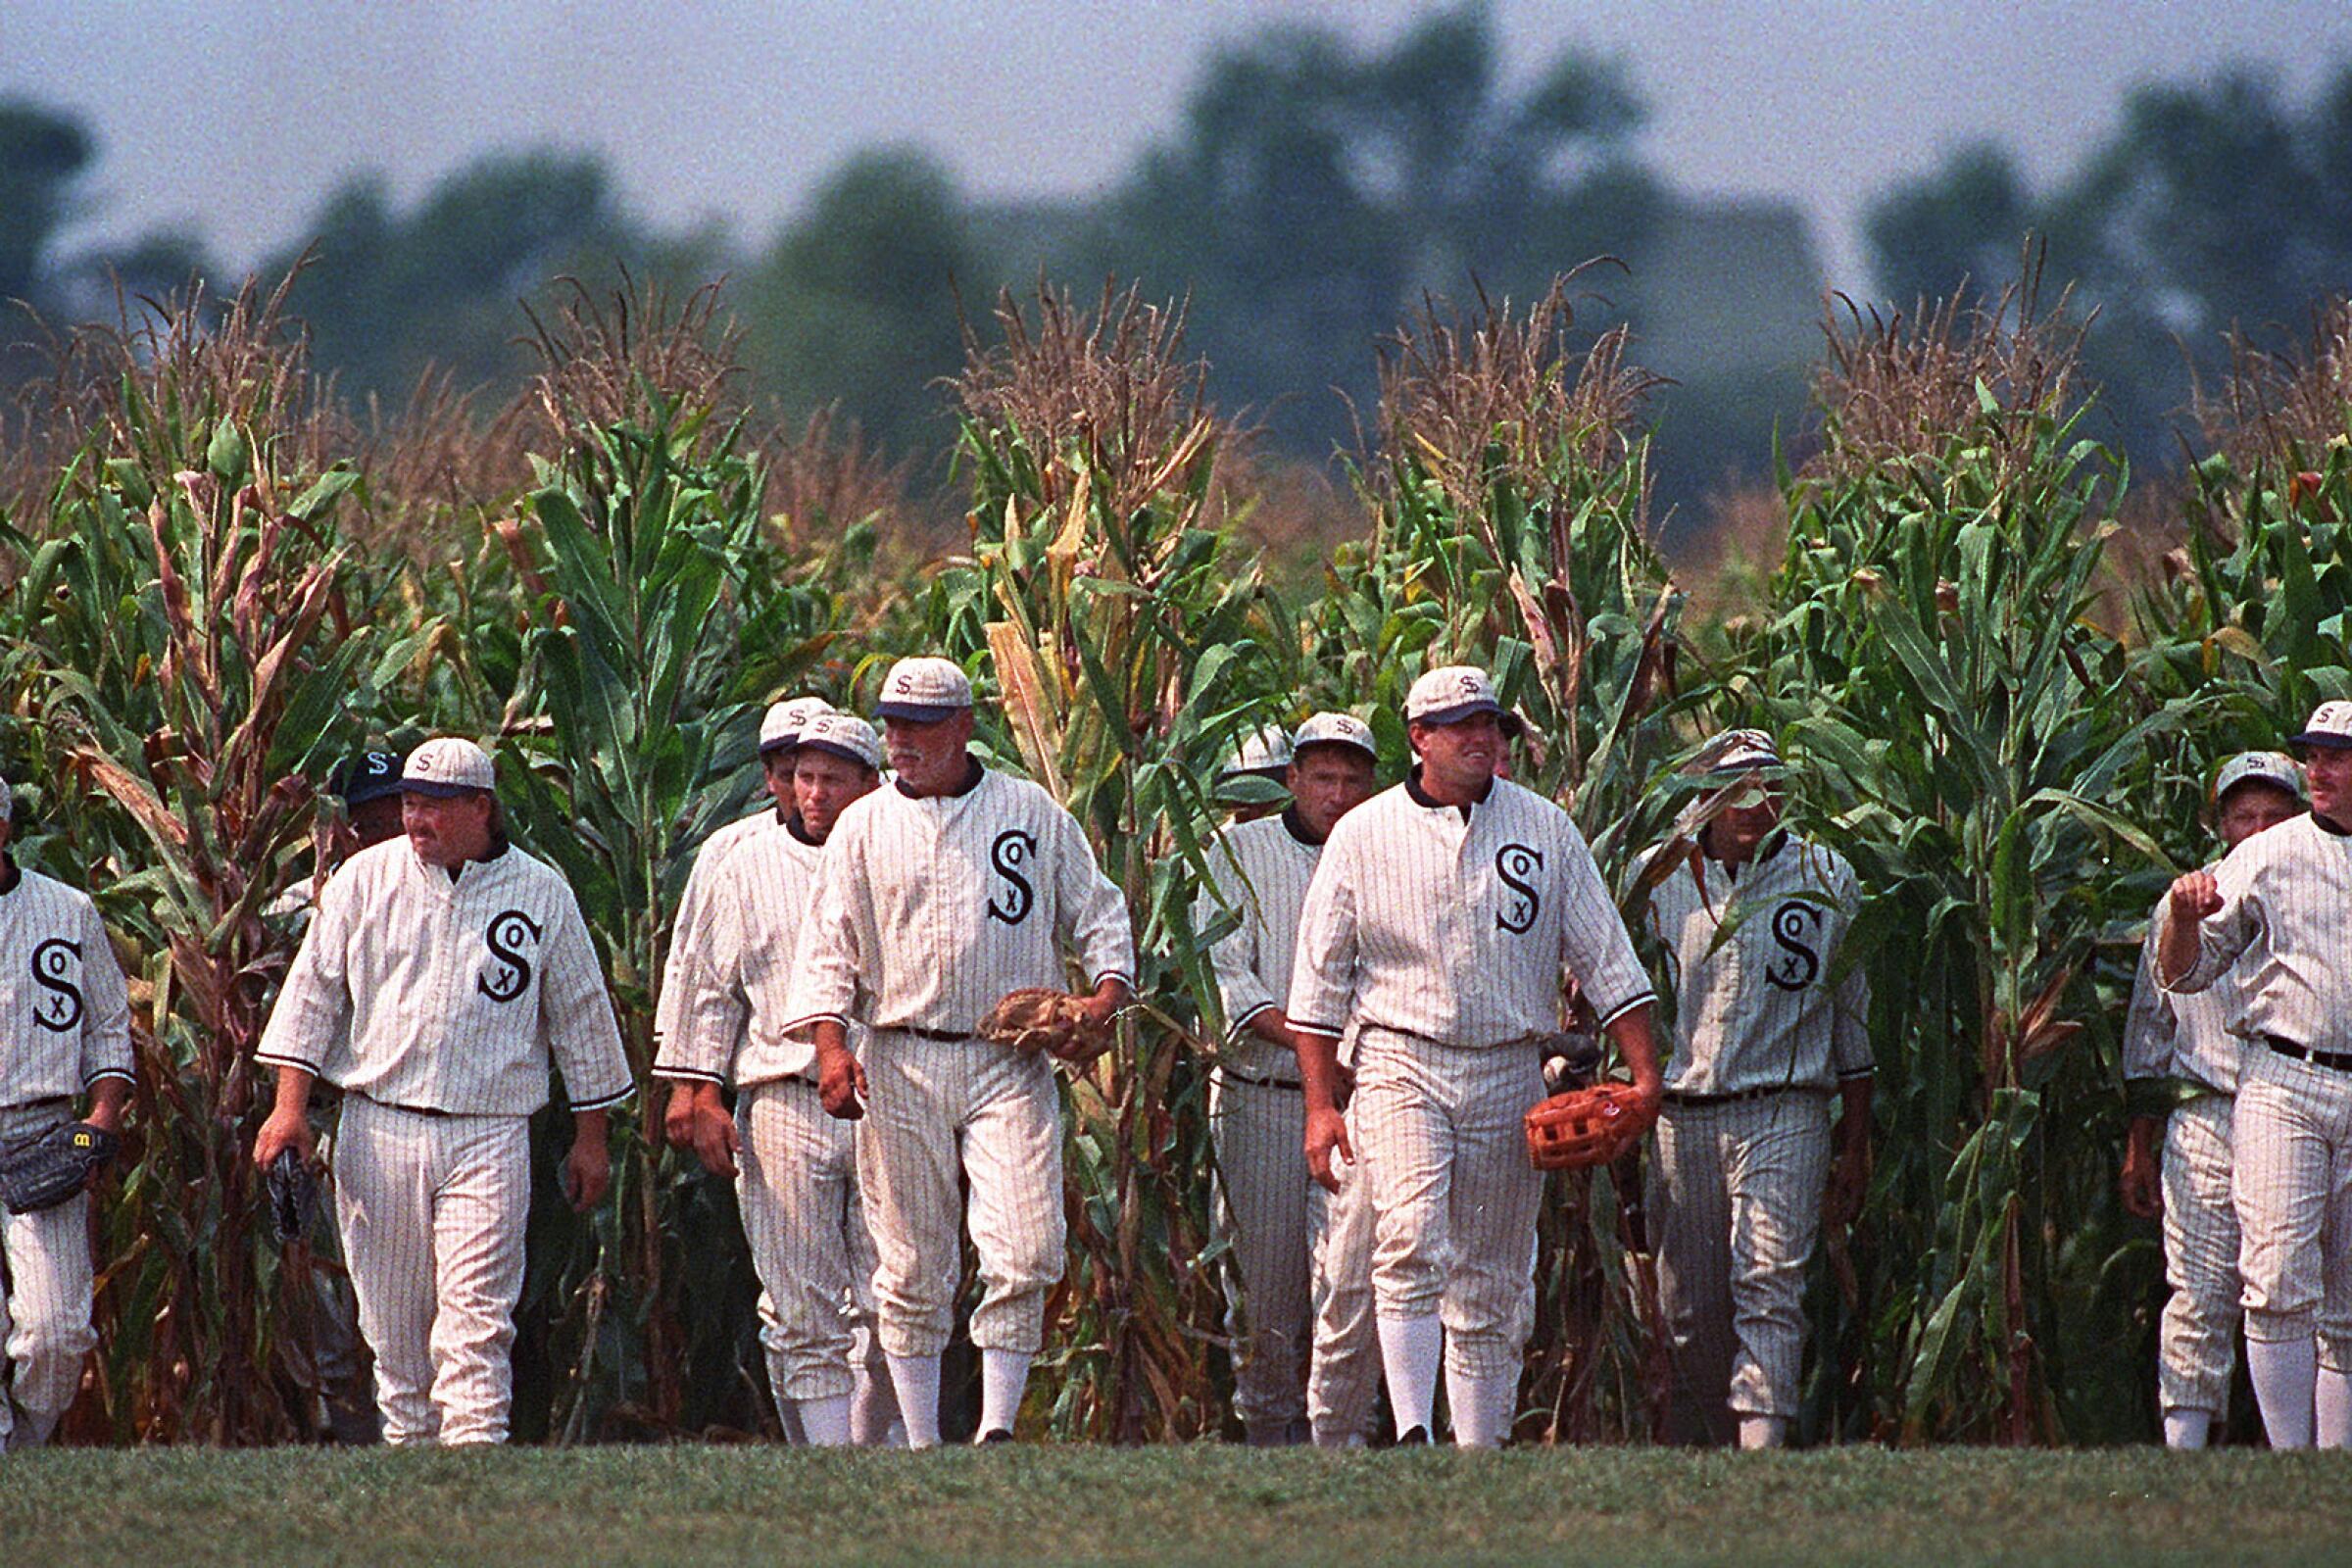 Field of Dreams game is MLB's guide to create more special events